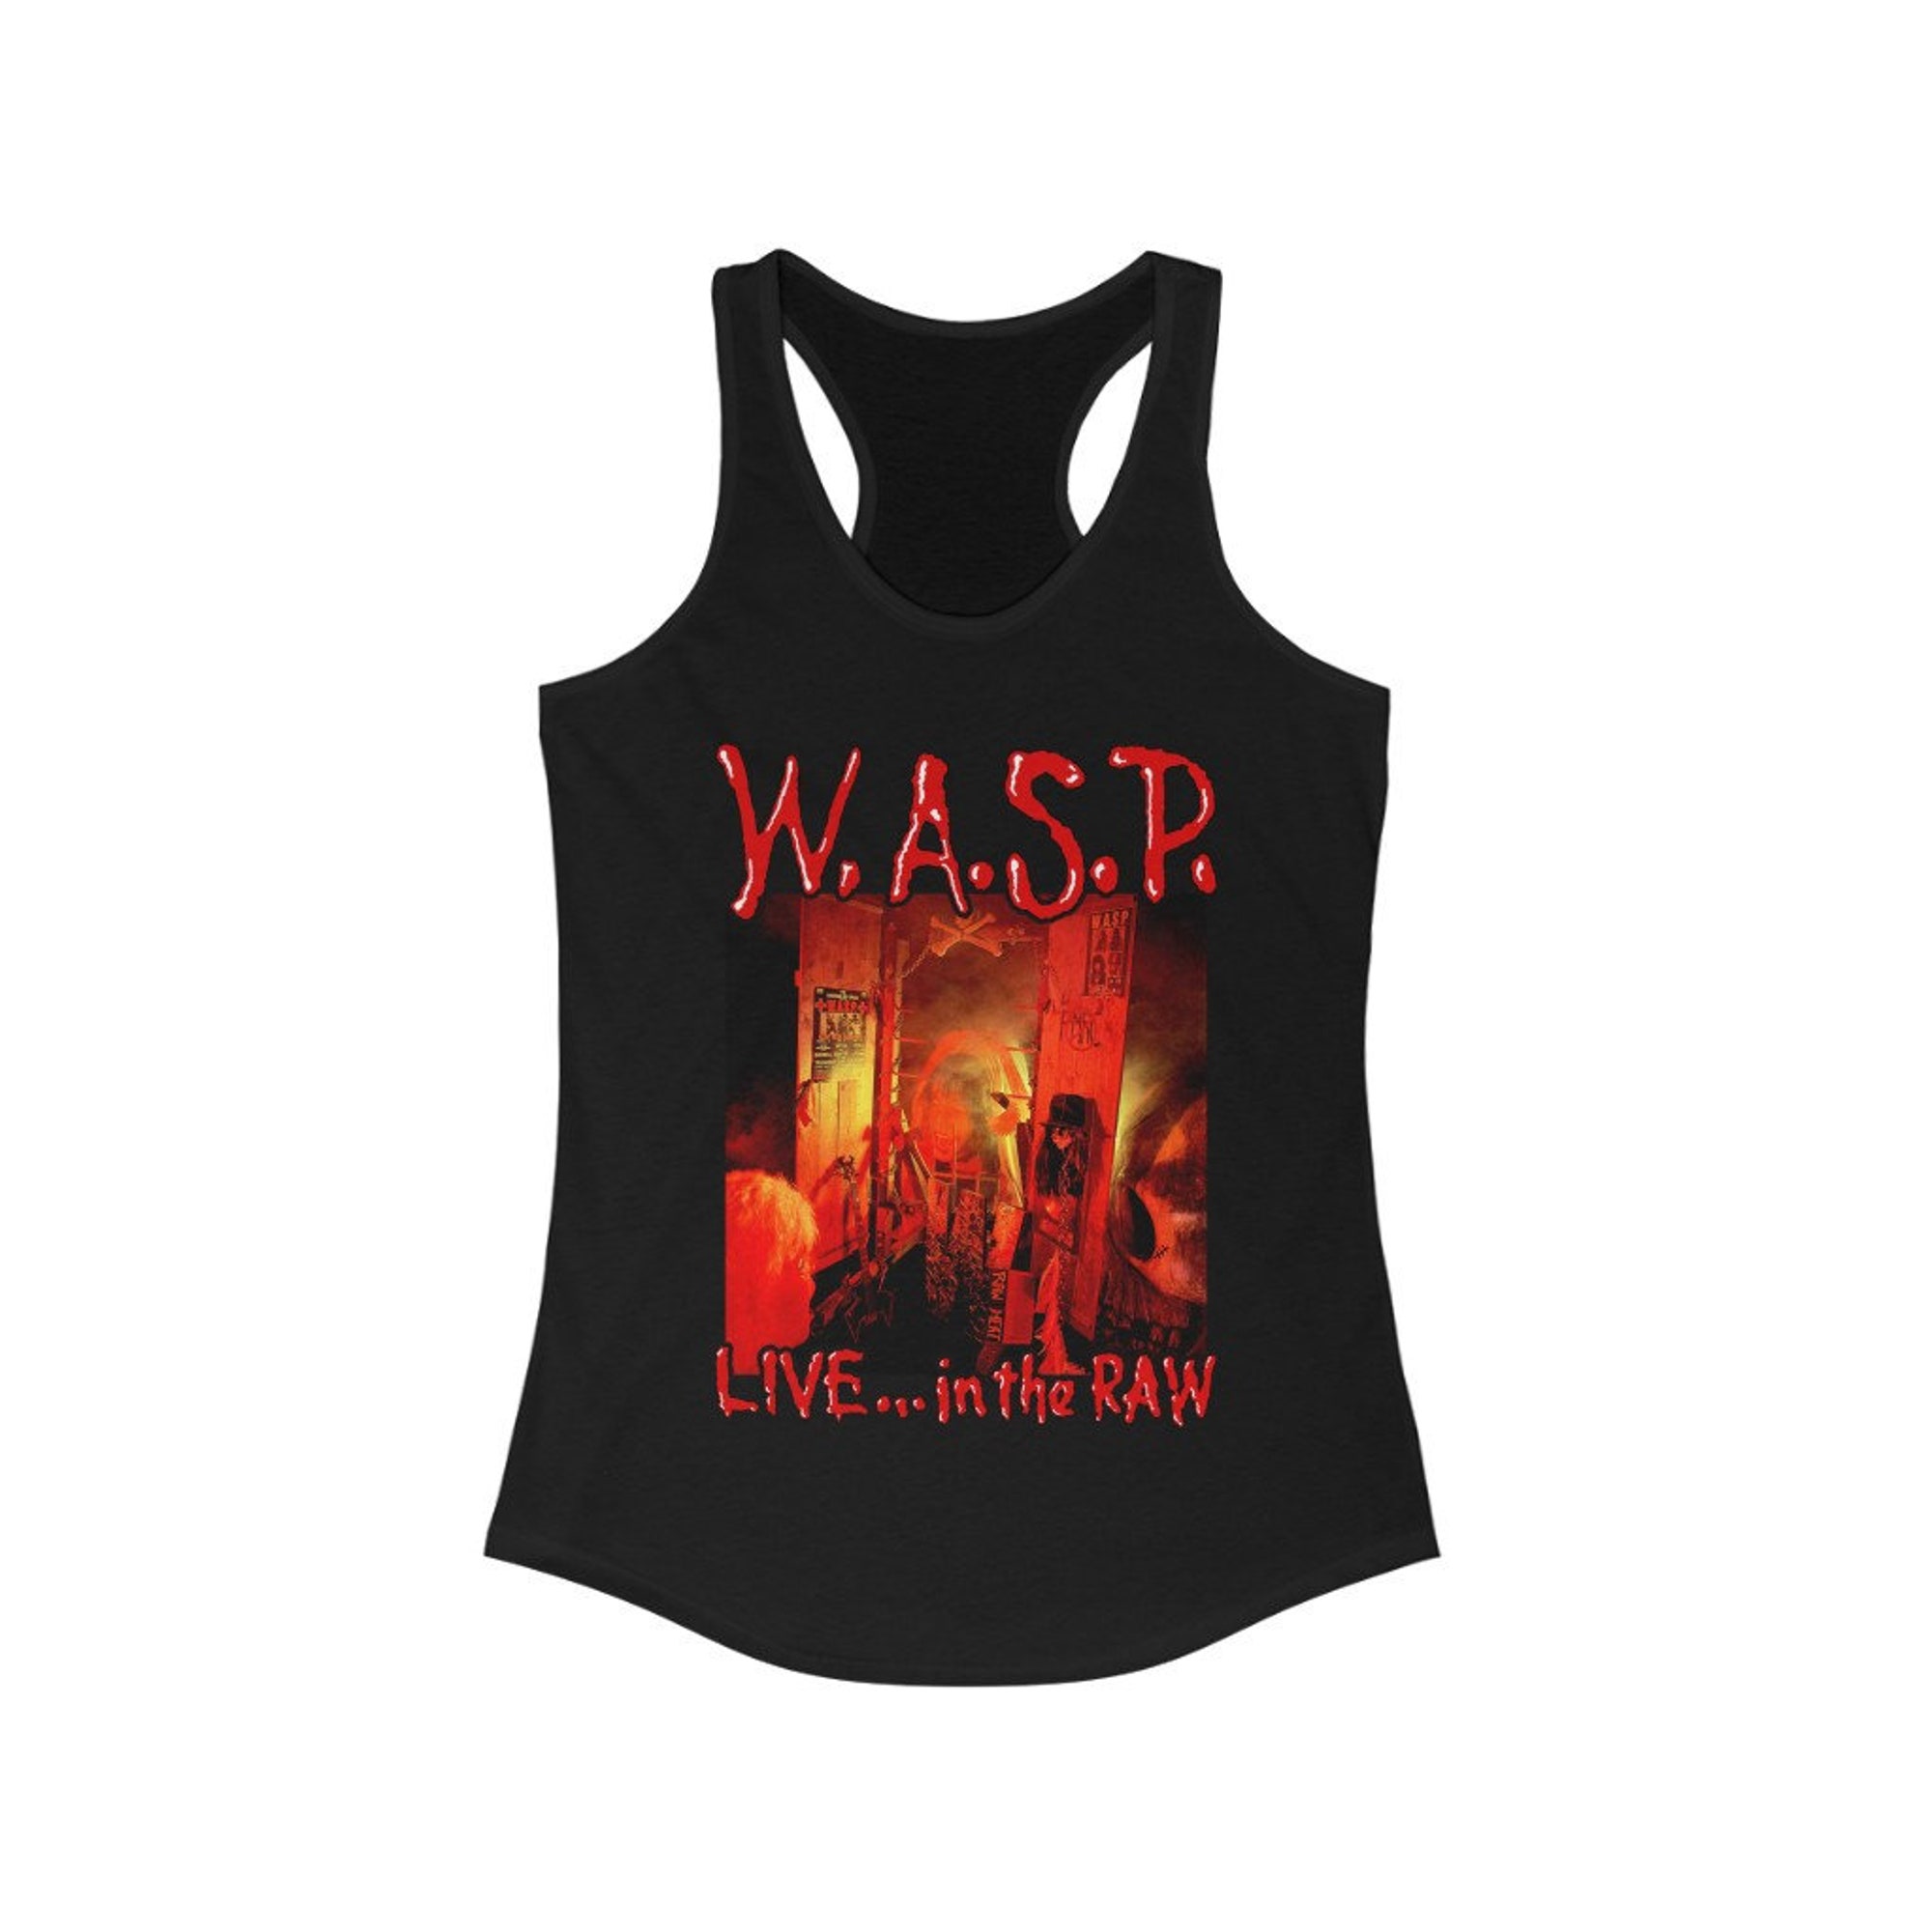 Discover W.A.S.P Womens Tank Top, Live... In the Raw, Ladies WASP Band Sleeveless Tee